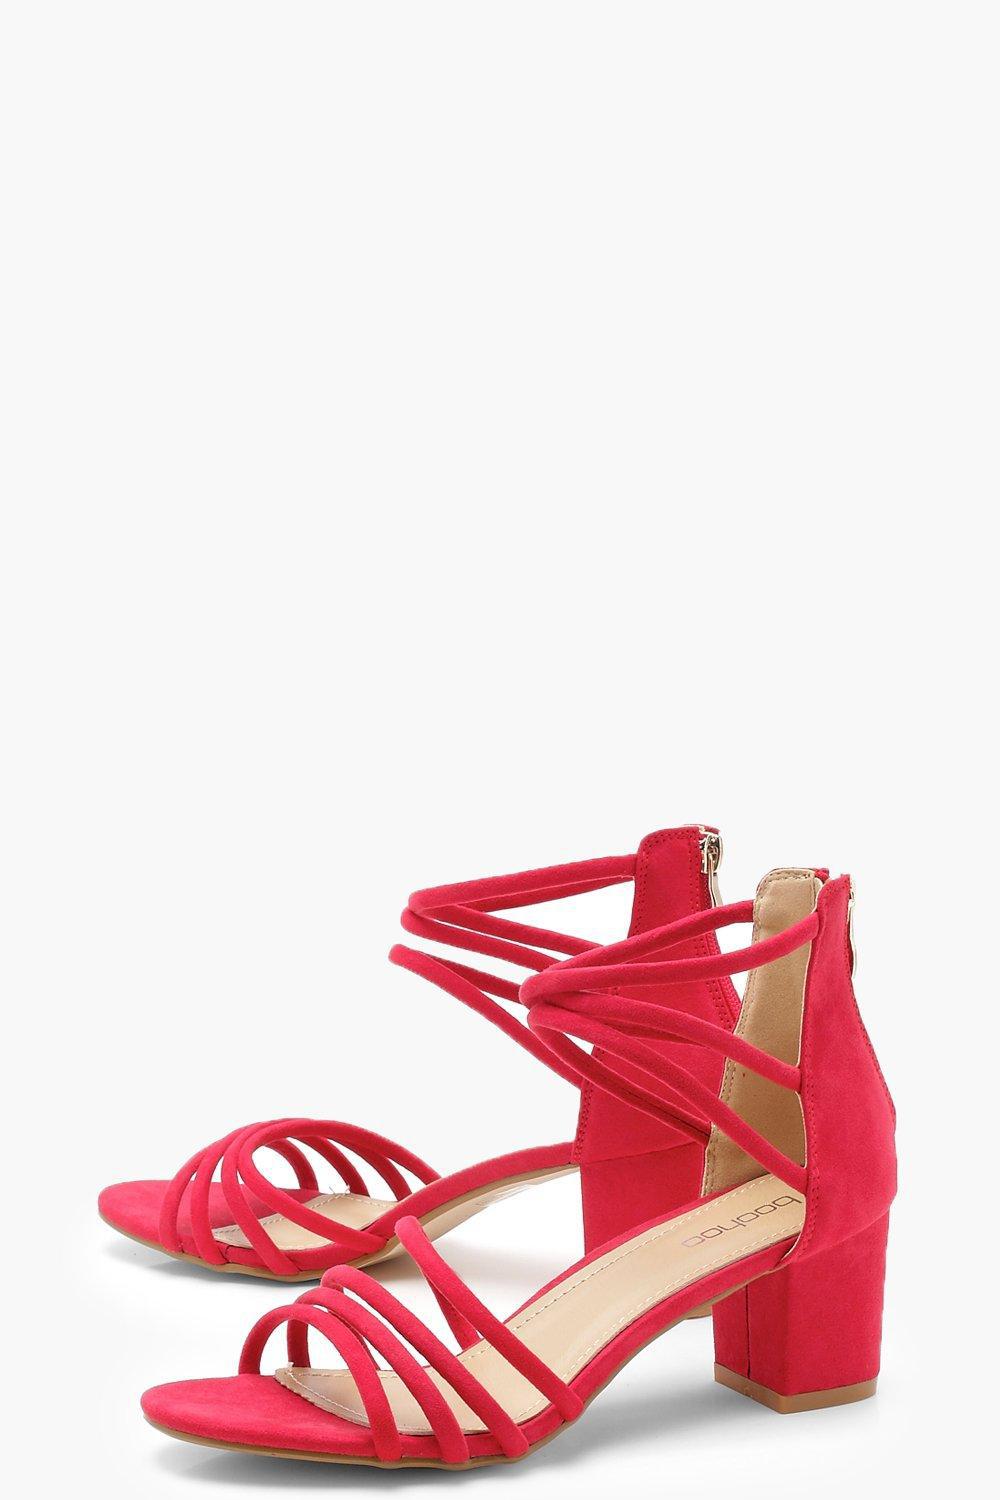 Boohoo Strappy Low Block Heels in Red | Lyst